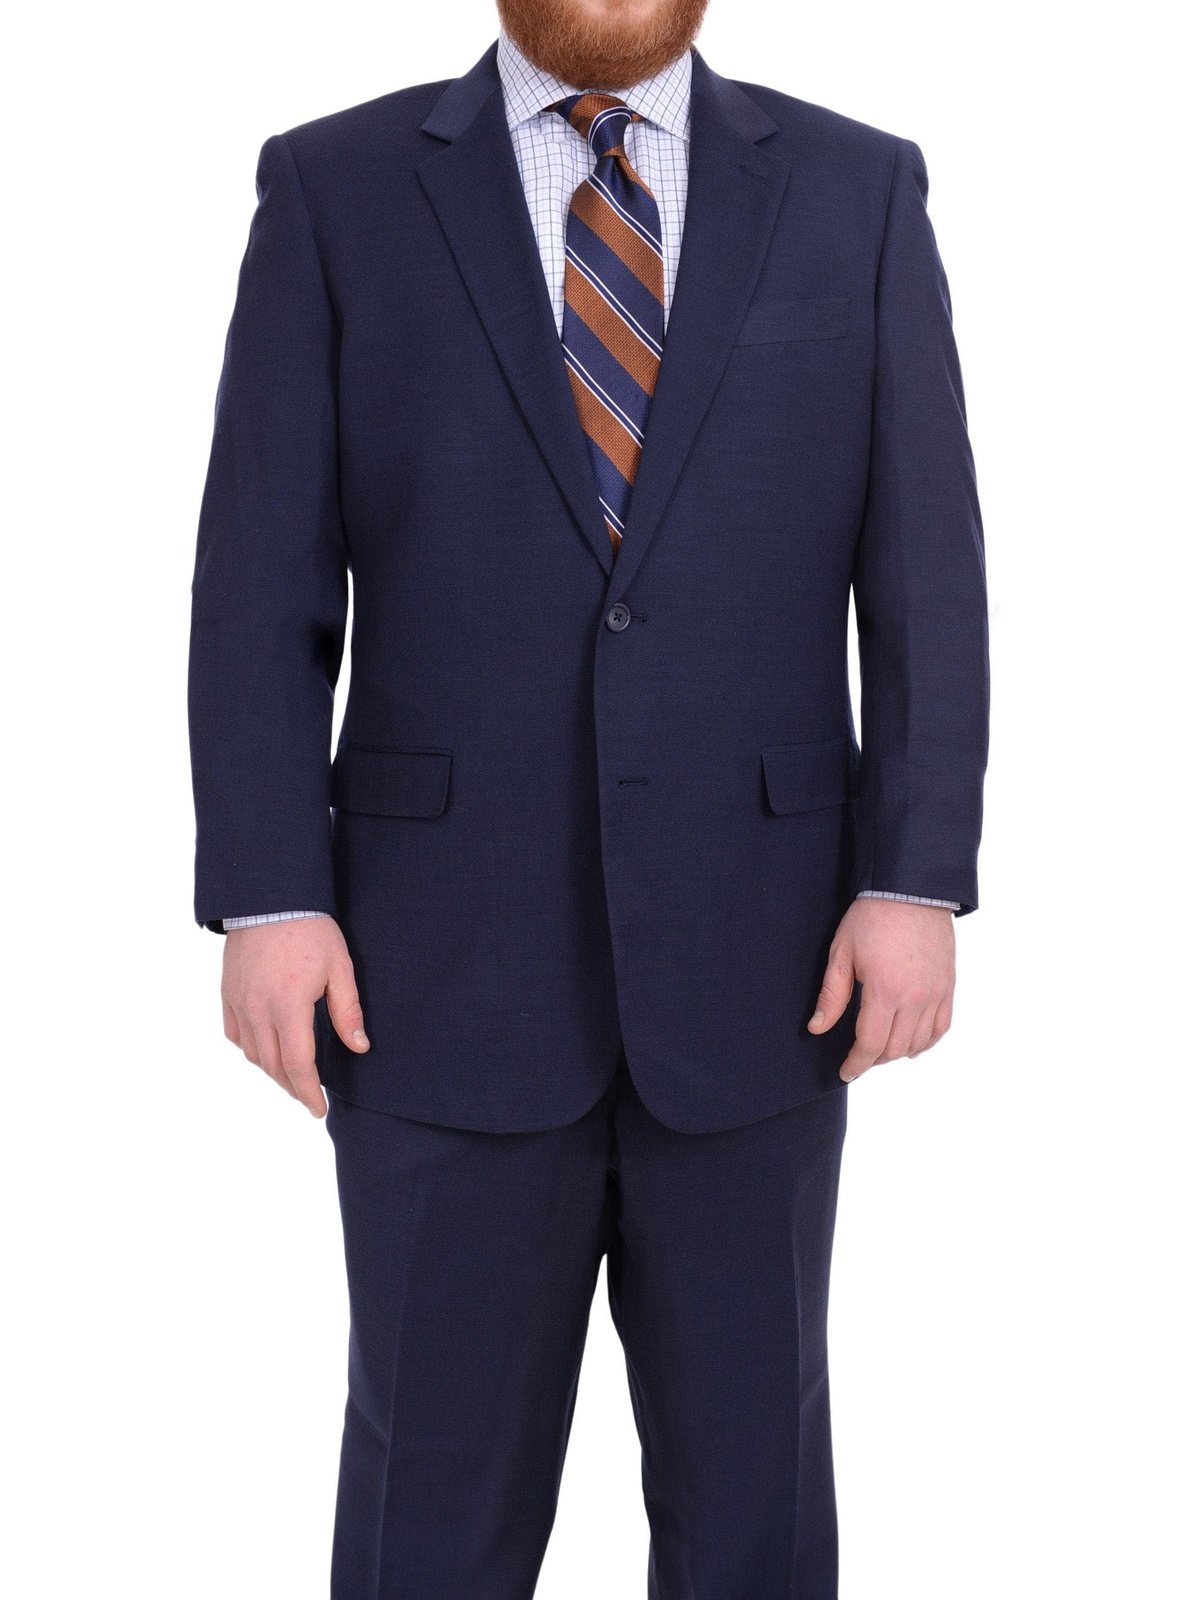 Lazetti Couture Sale Suits Lazetti Couture Portly Fit Navy Blue Textured Two Button Wool Suit